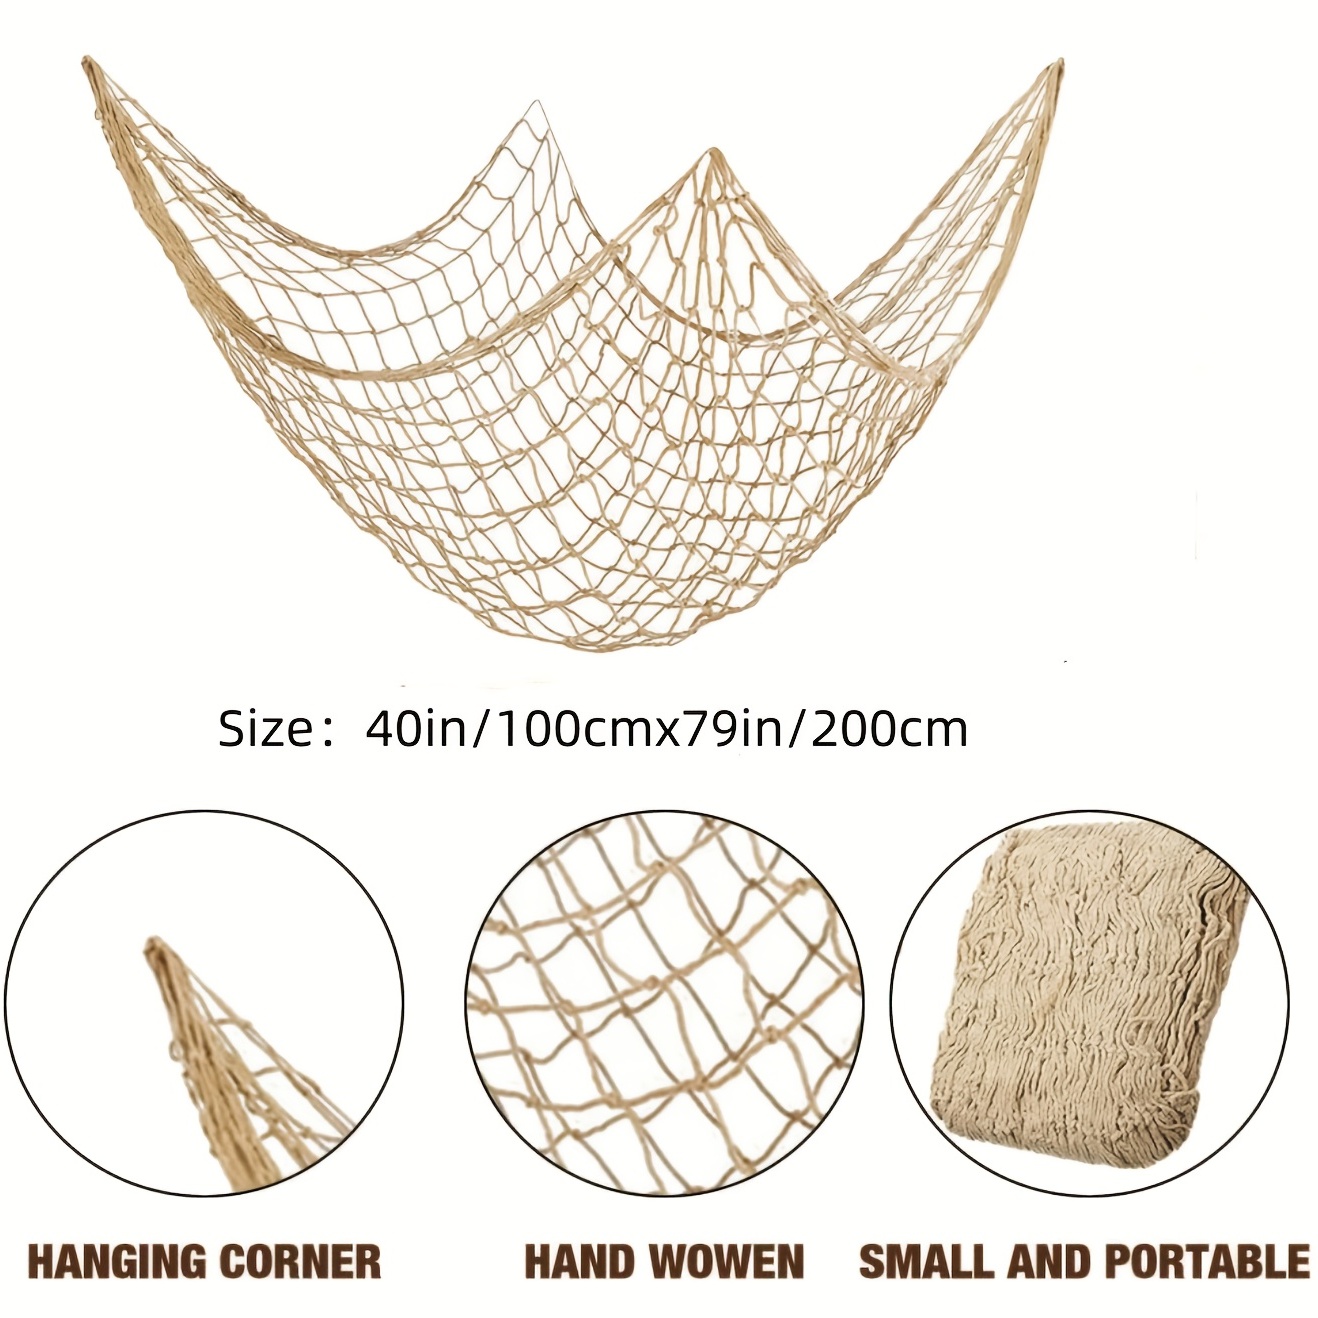 4 Pieces Natural Fish Net Decoration 80 x 40, Wall Hanging Cotton Fishnet  Decor for Underwater, Mermaid, Pirate, Hawaiian, Nautical Ocean Theme